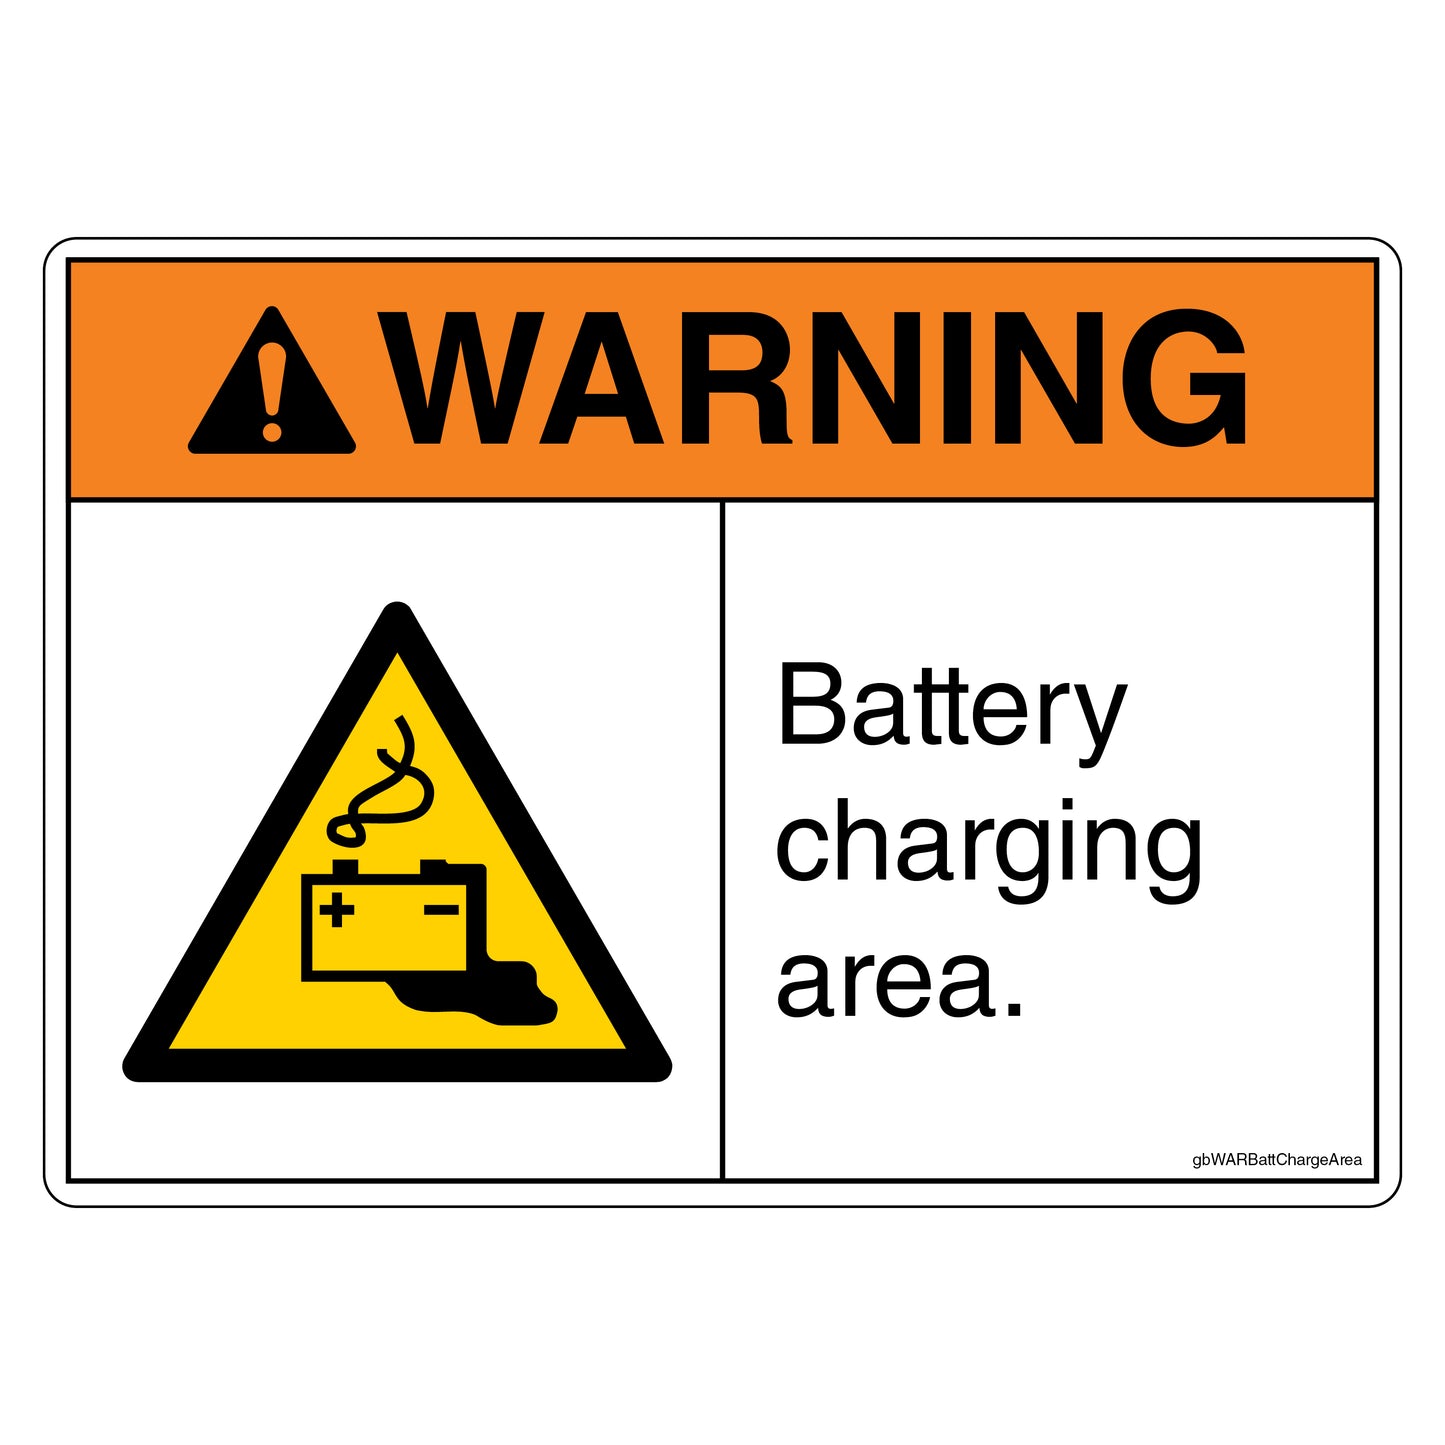 Warning Battery Charging Area Decal. 4 inches by 3 inches in size.